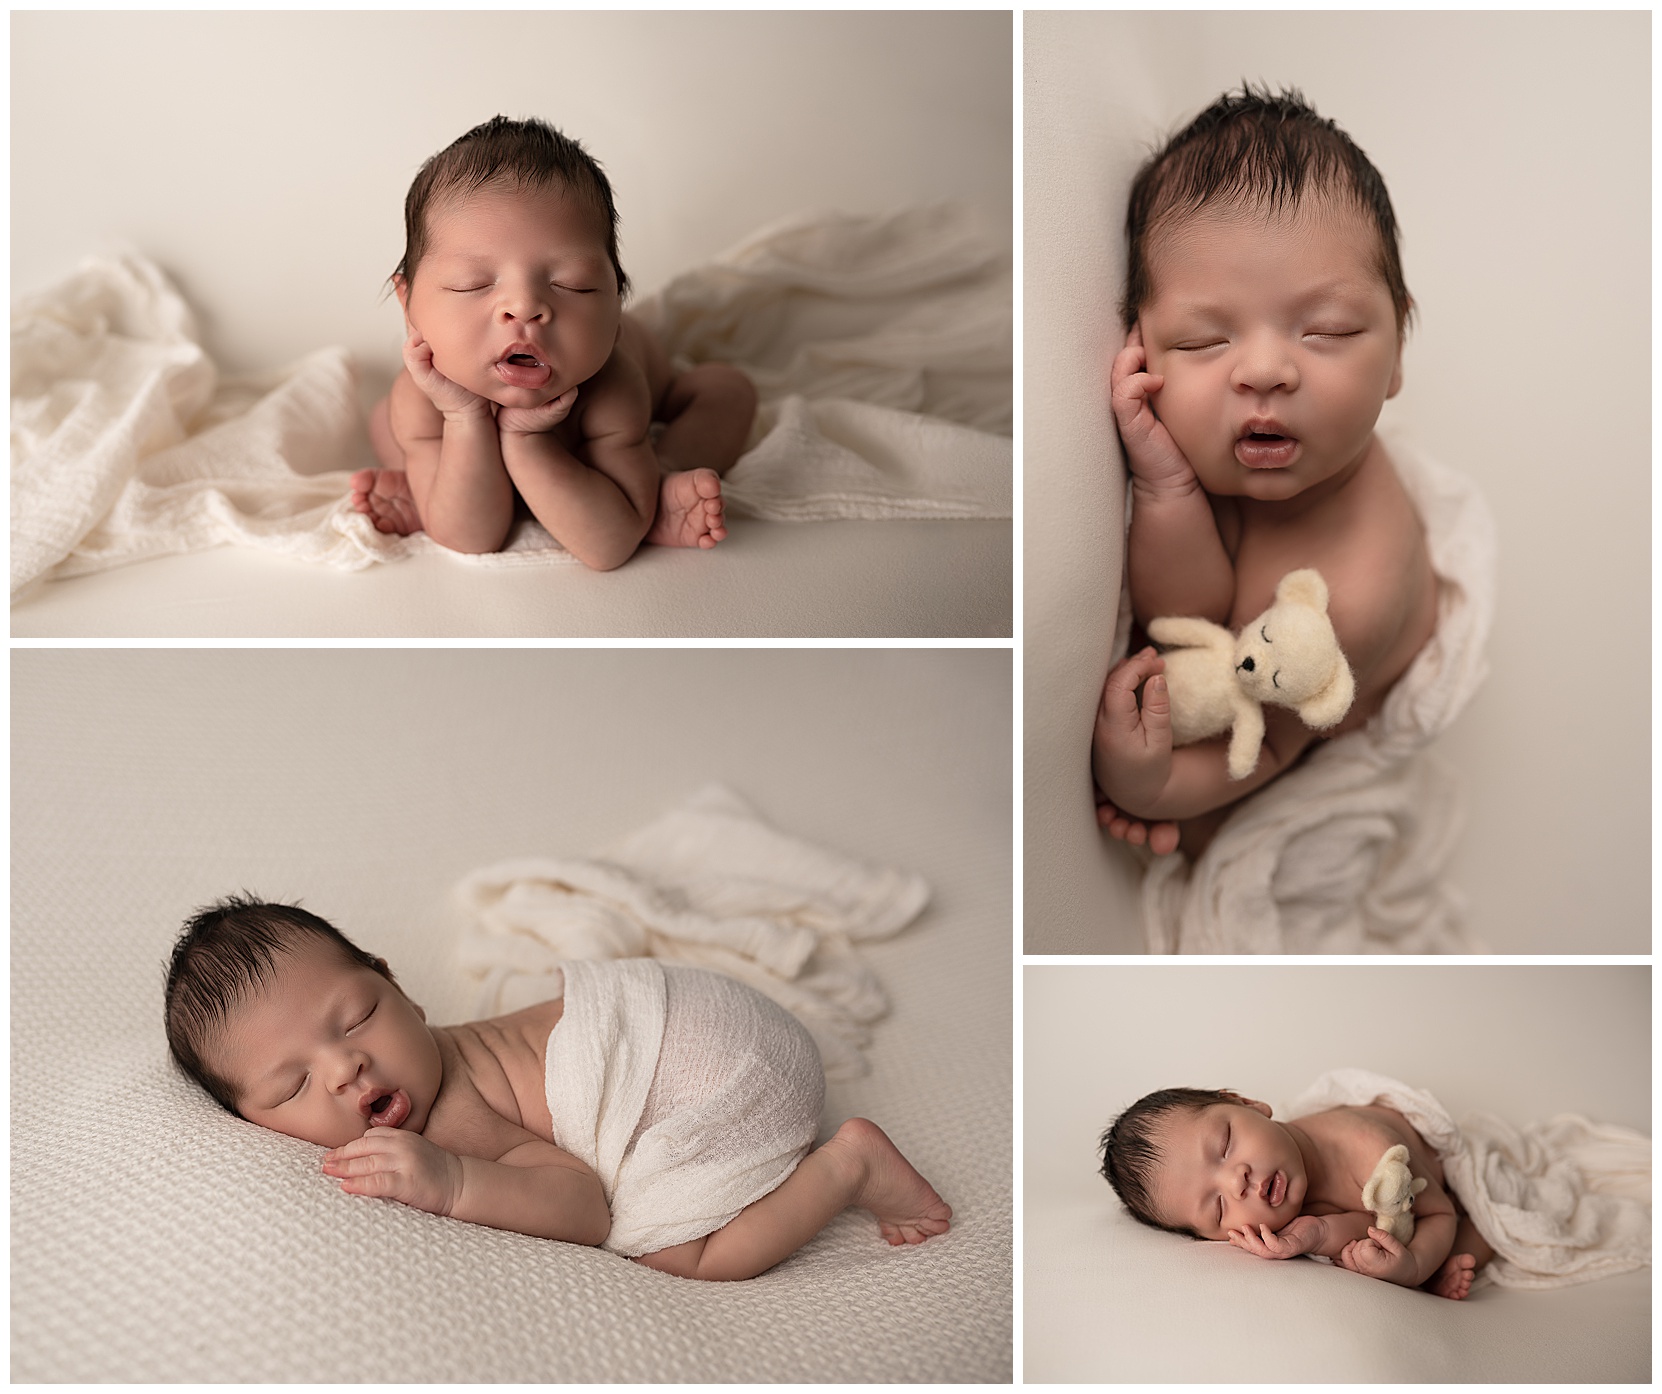 photos of a sleeping baby boy on a cream colored blanket